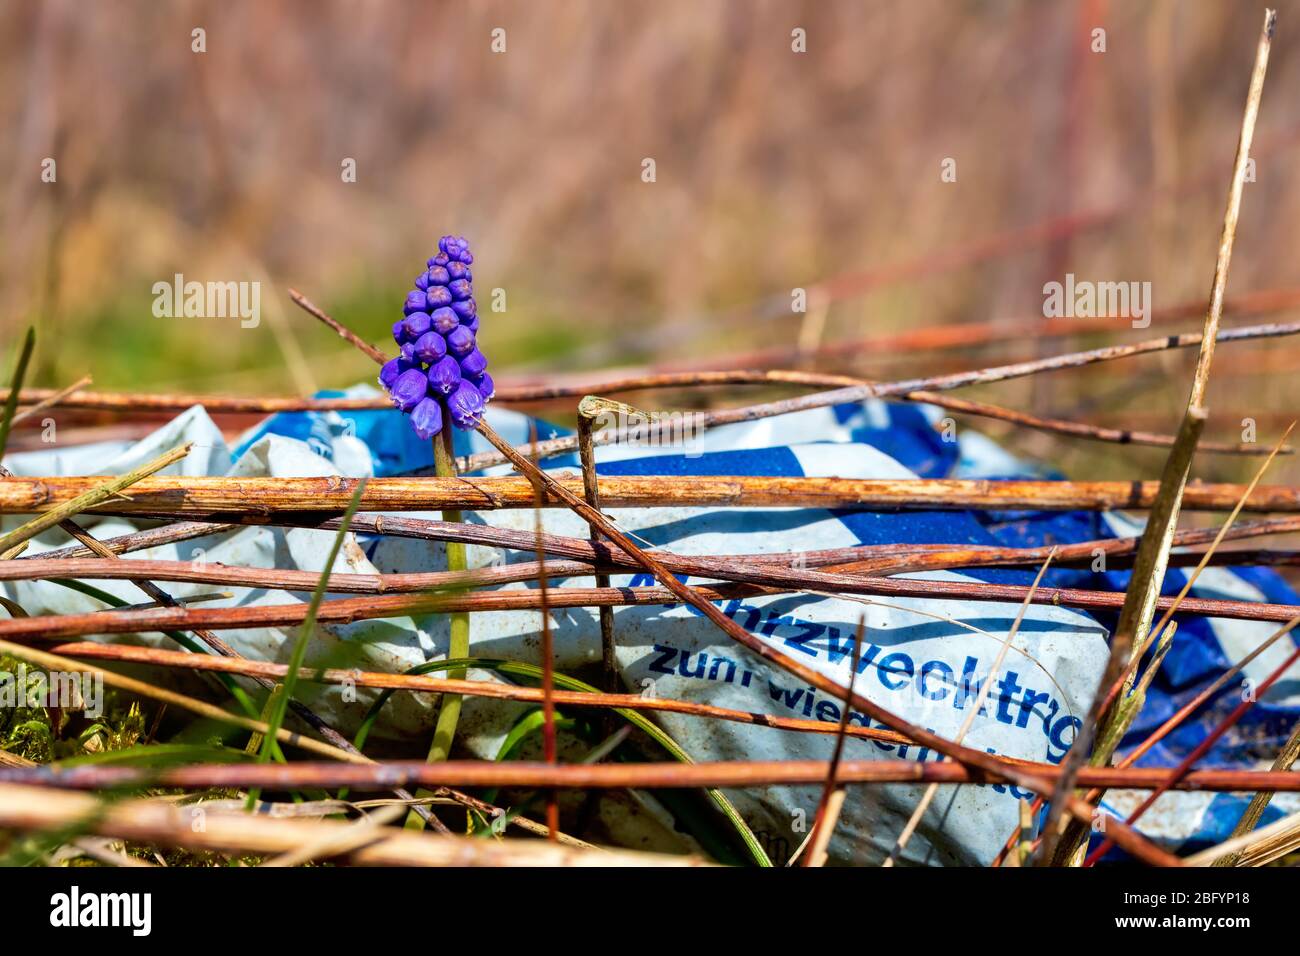 Muscari neglectum or grape hyacinth growing next to a plastic bag on a covered landfill in Bad Iburg in northwest Germany Stock Photo